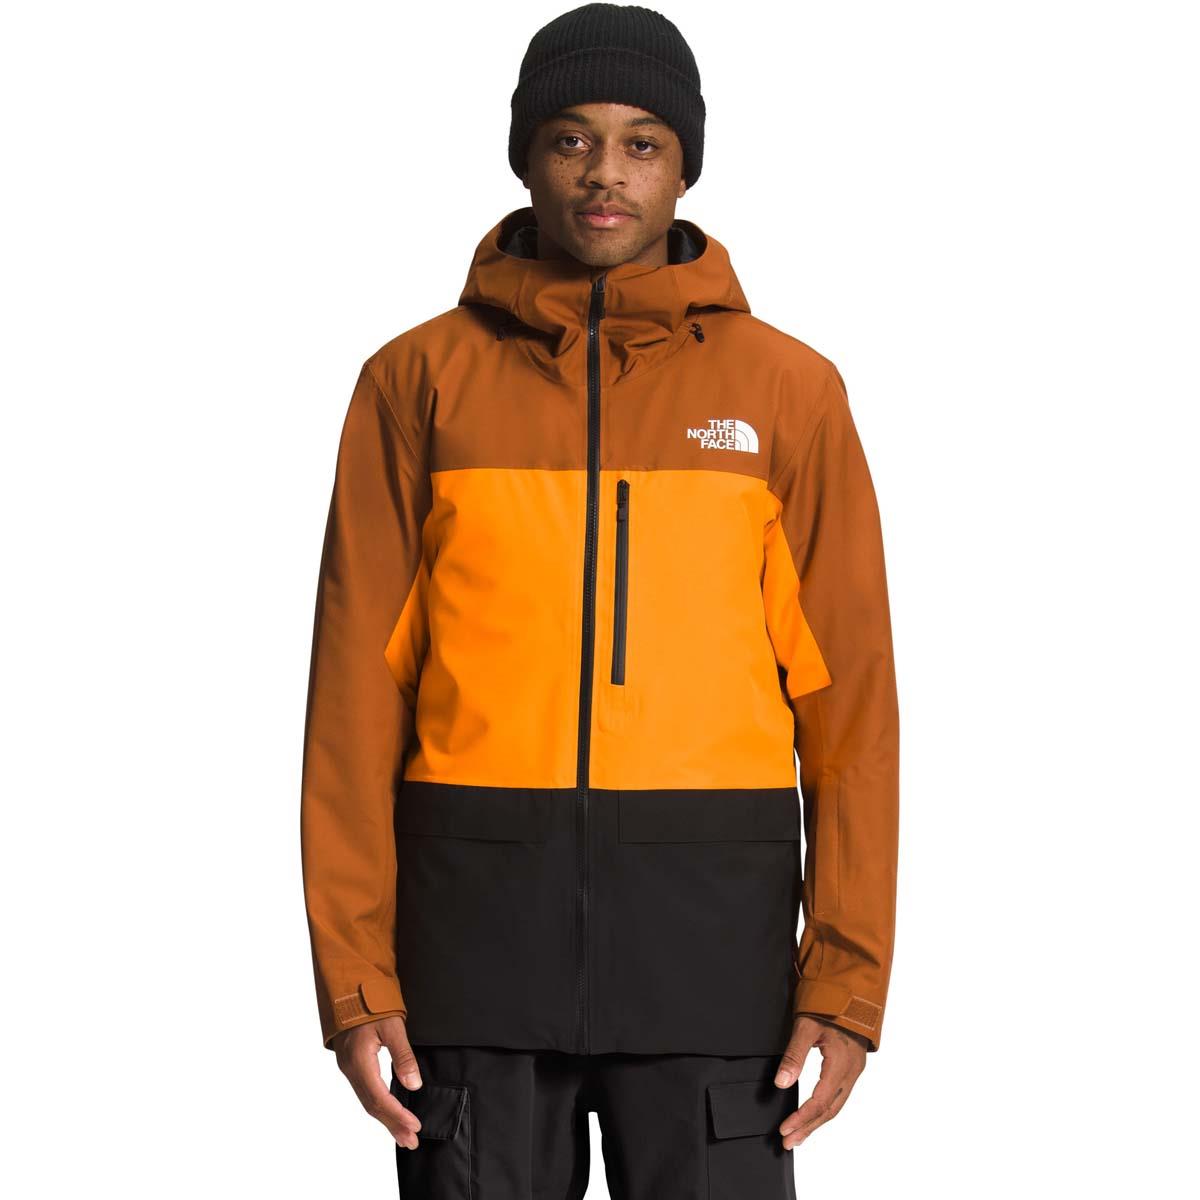 The North Face Men's Jackets | REI Co-op